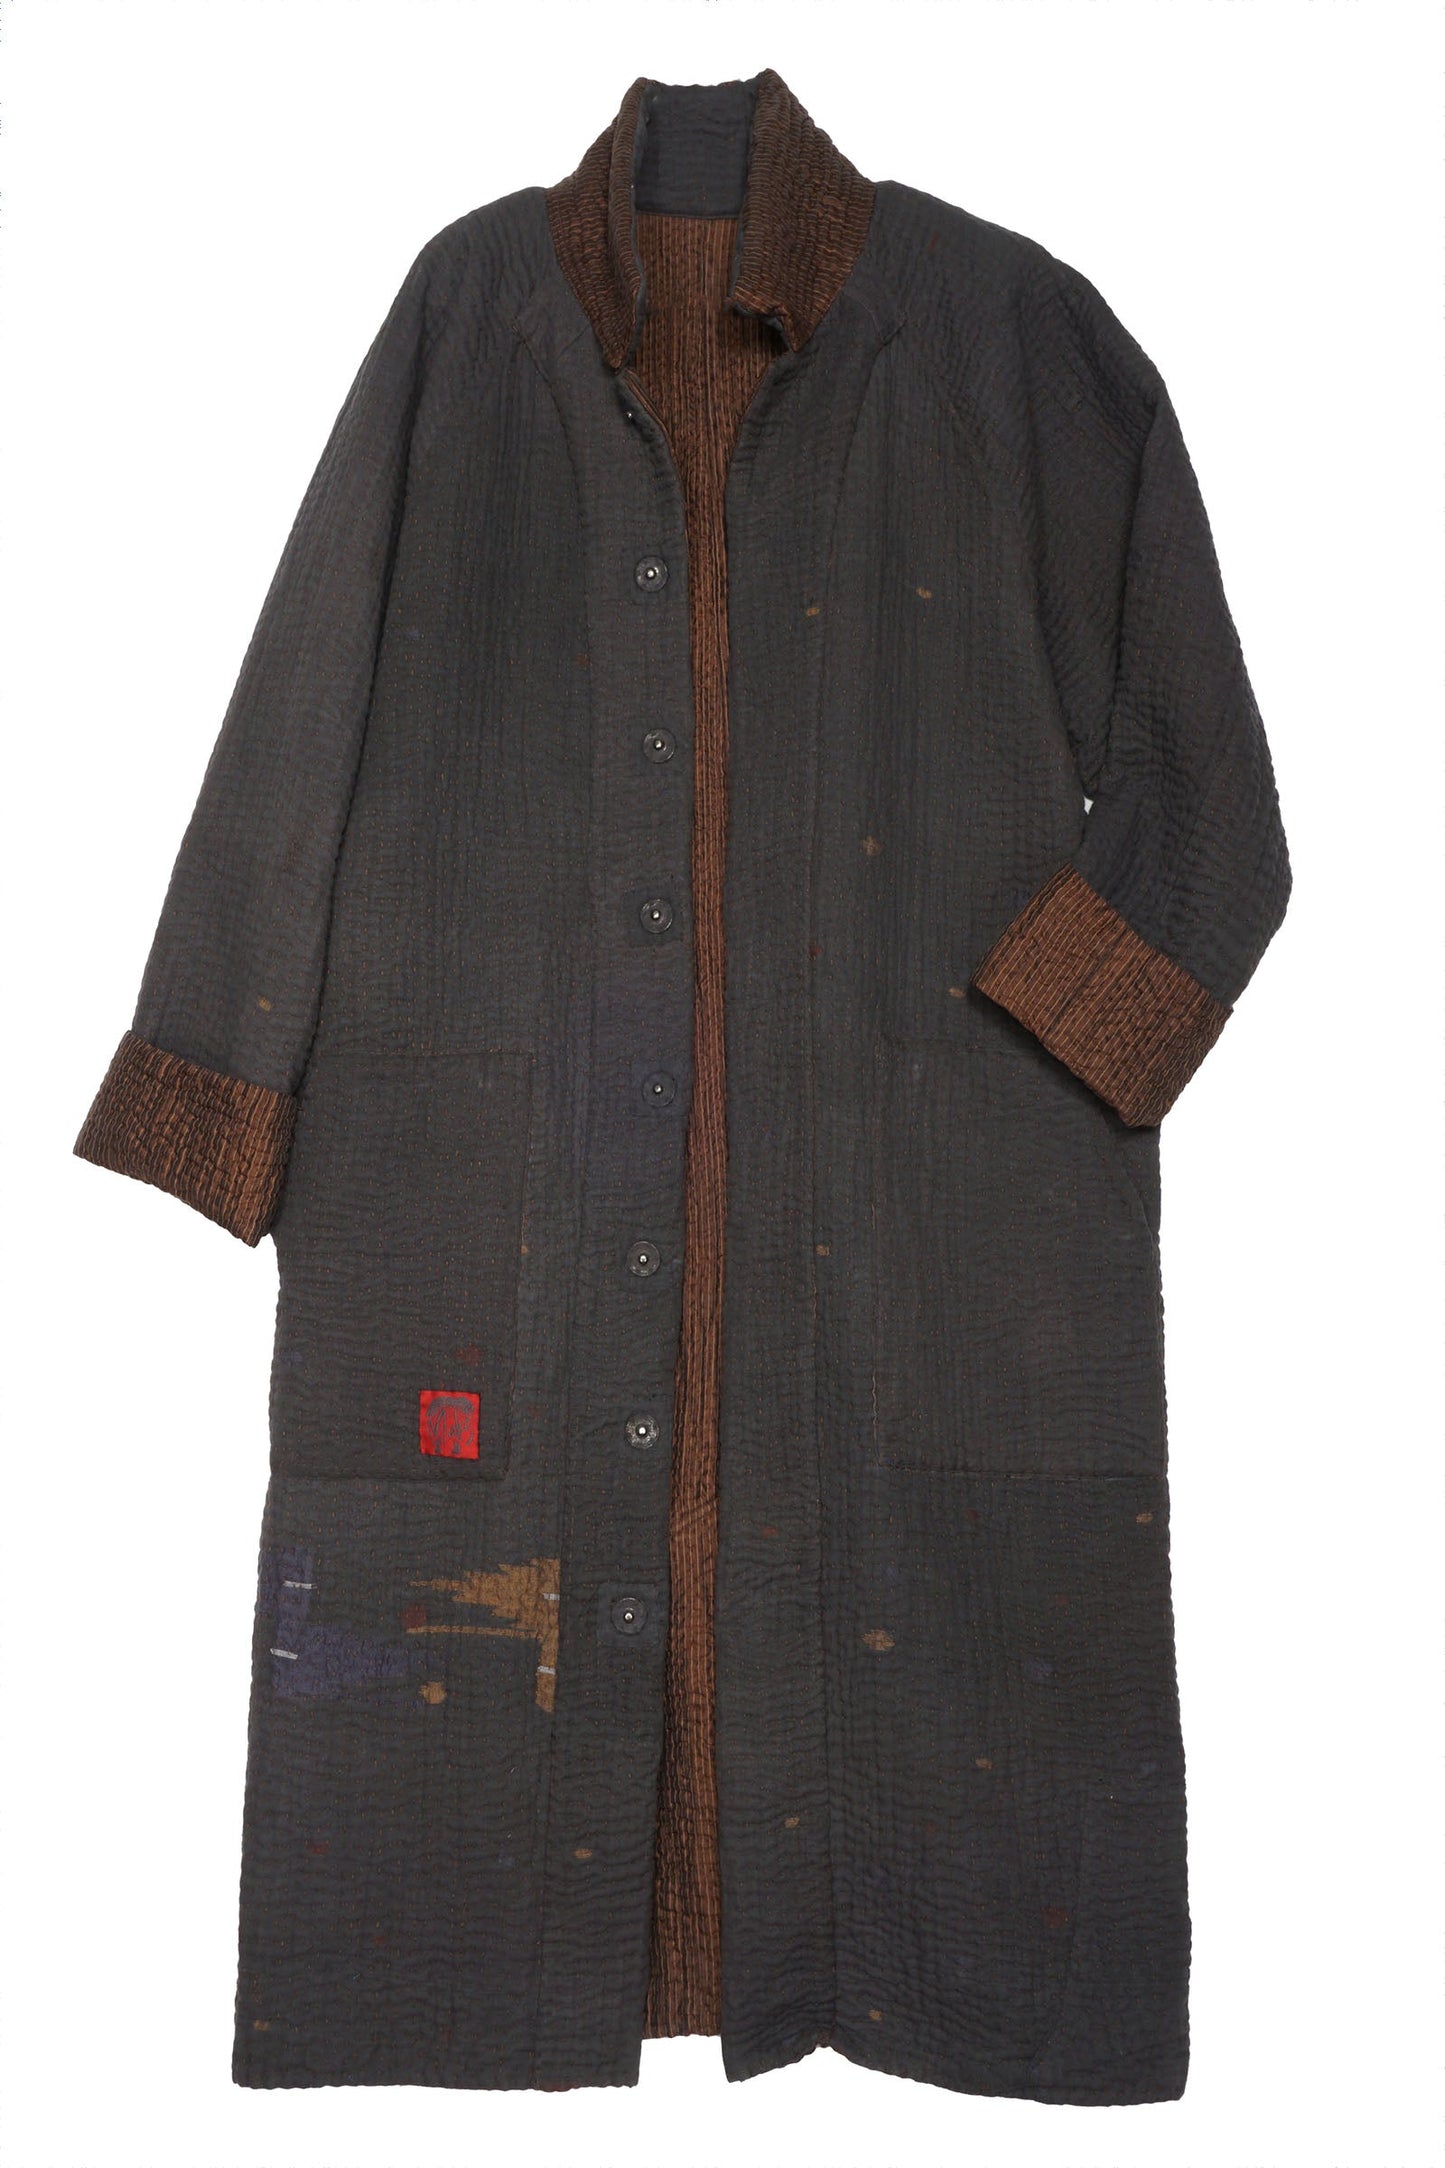 QUILTED VINTAGE COTTON WITH FLANNEL KANTHA RAGLAN SLEEVE COAT - fq5337-brn -